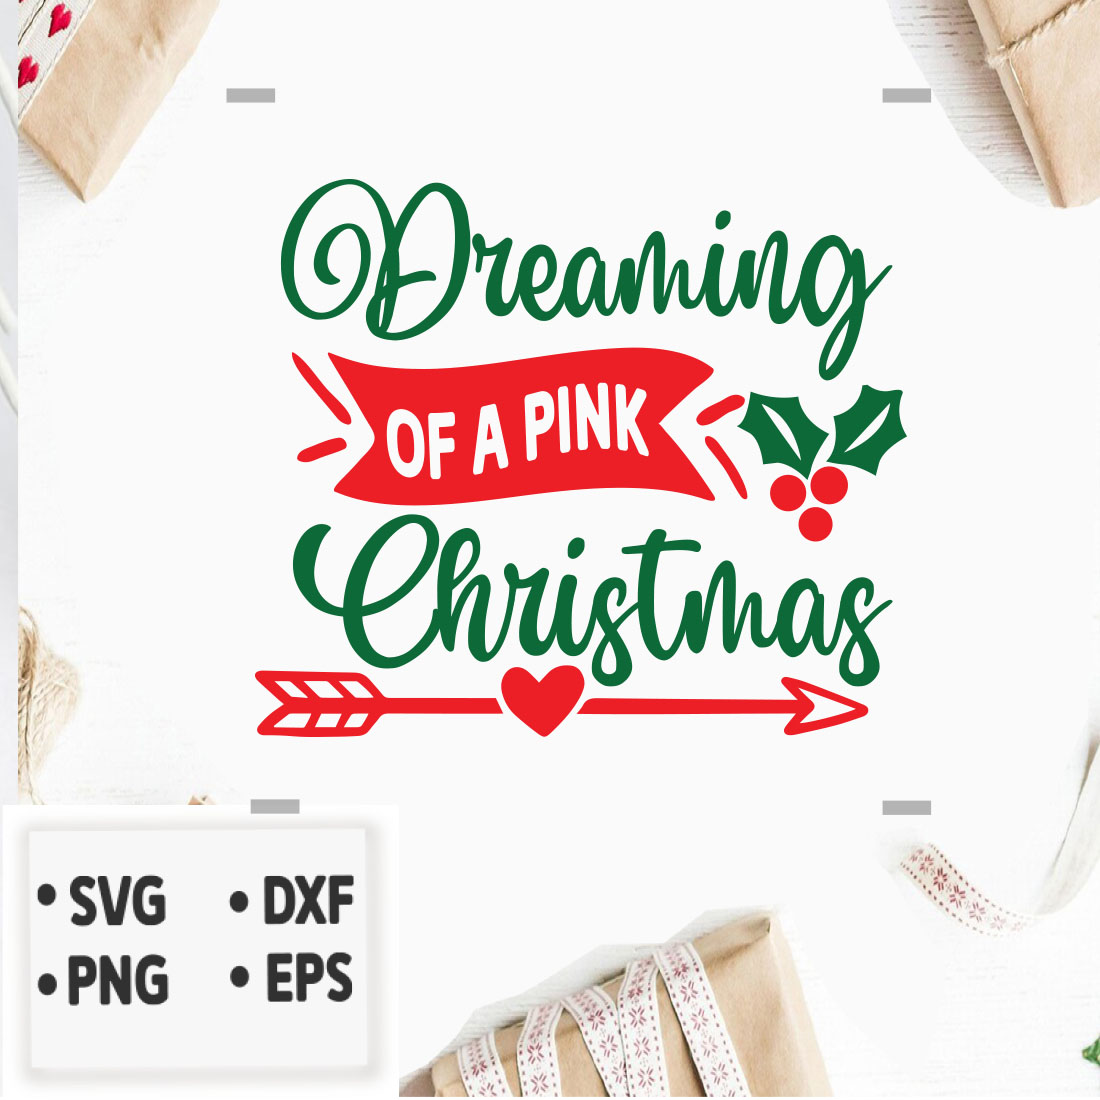 Image with beautiful prints Dreaming of a pink Christmas.